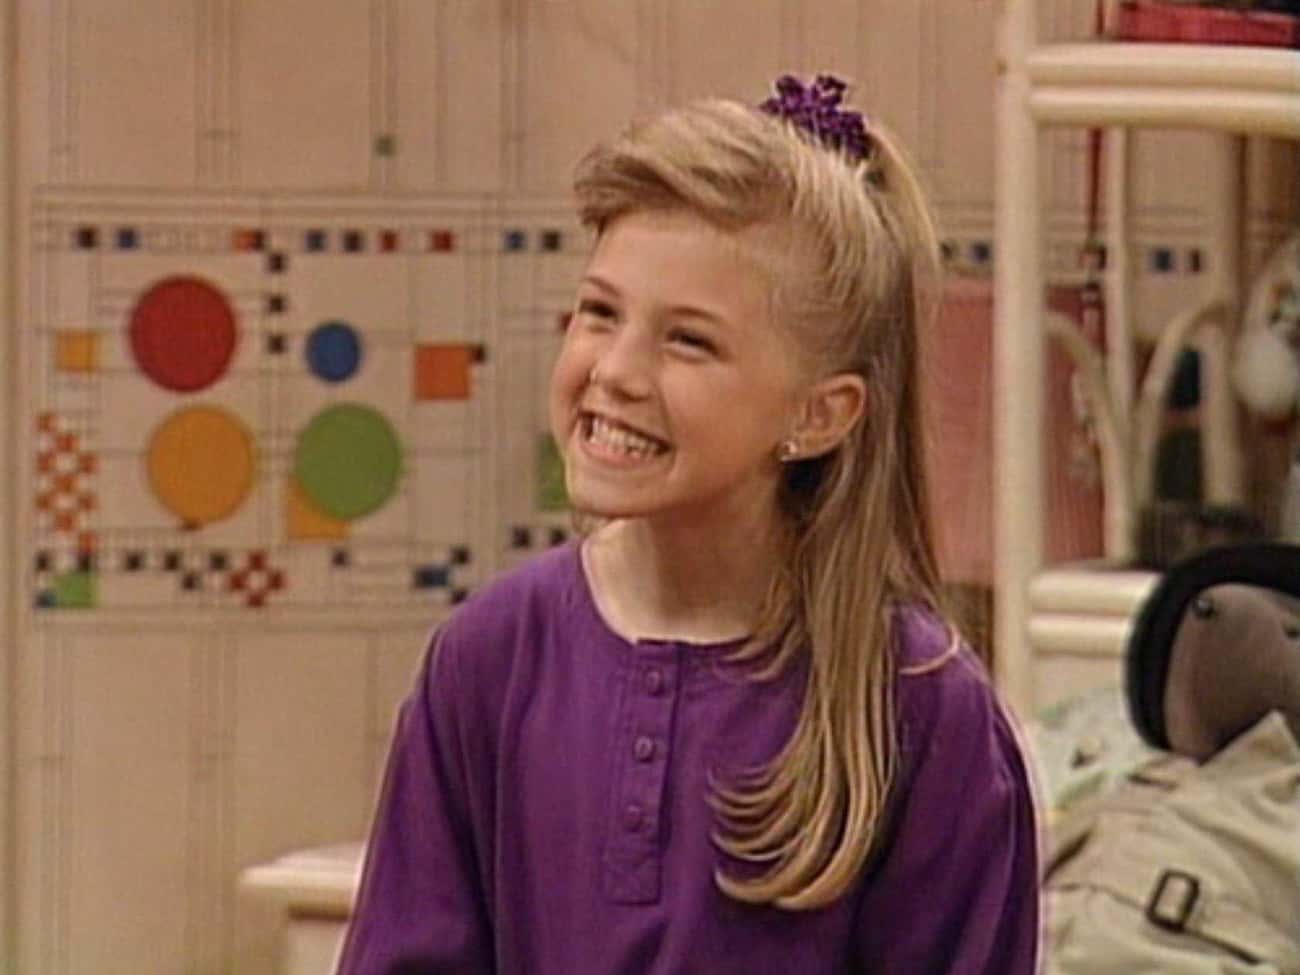 Jodie Sweetin Of 'Full House' Said Her Friends Were Obsessed With John Stamos - But To Her He Was A 'Big Dork'